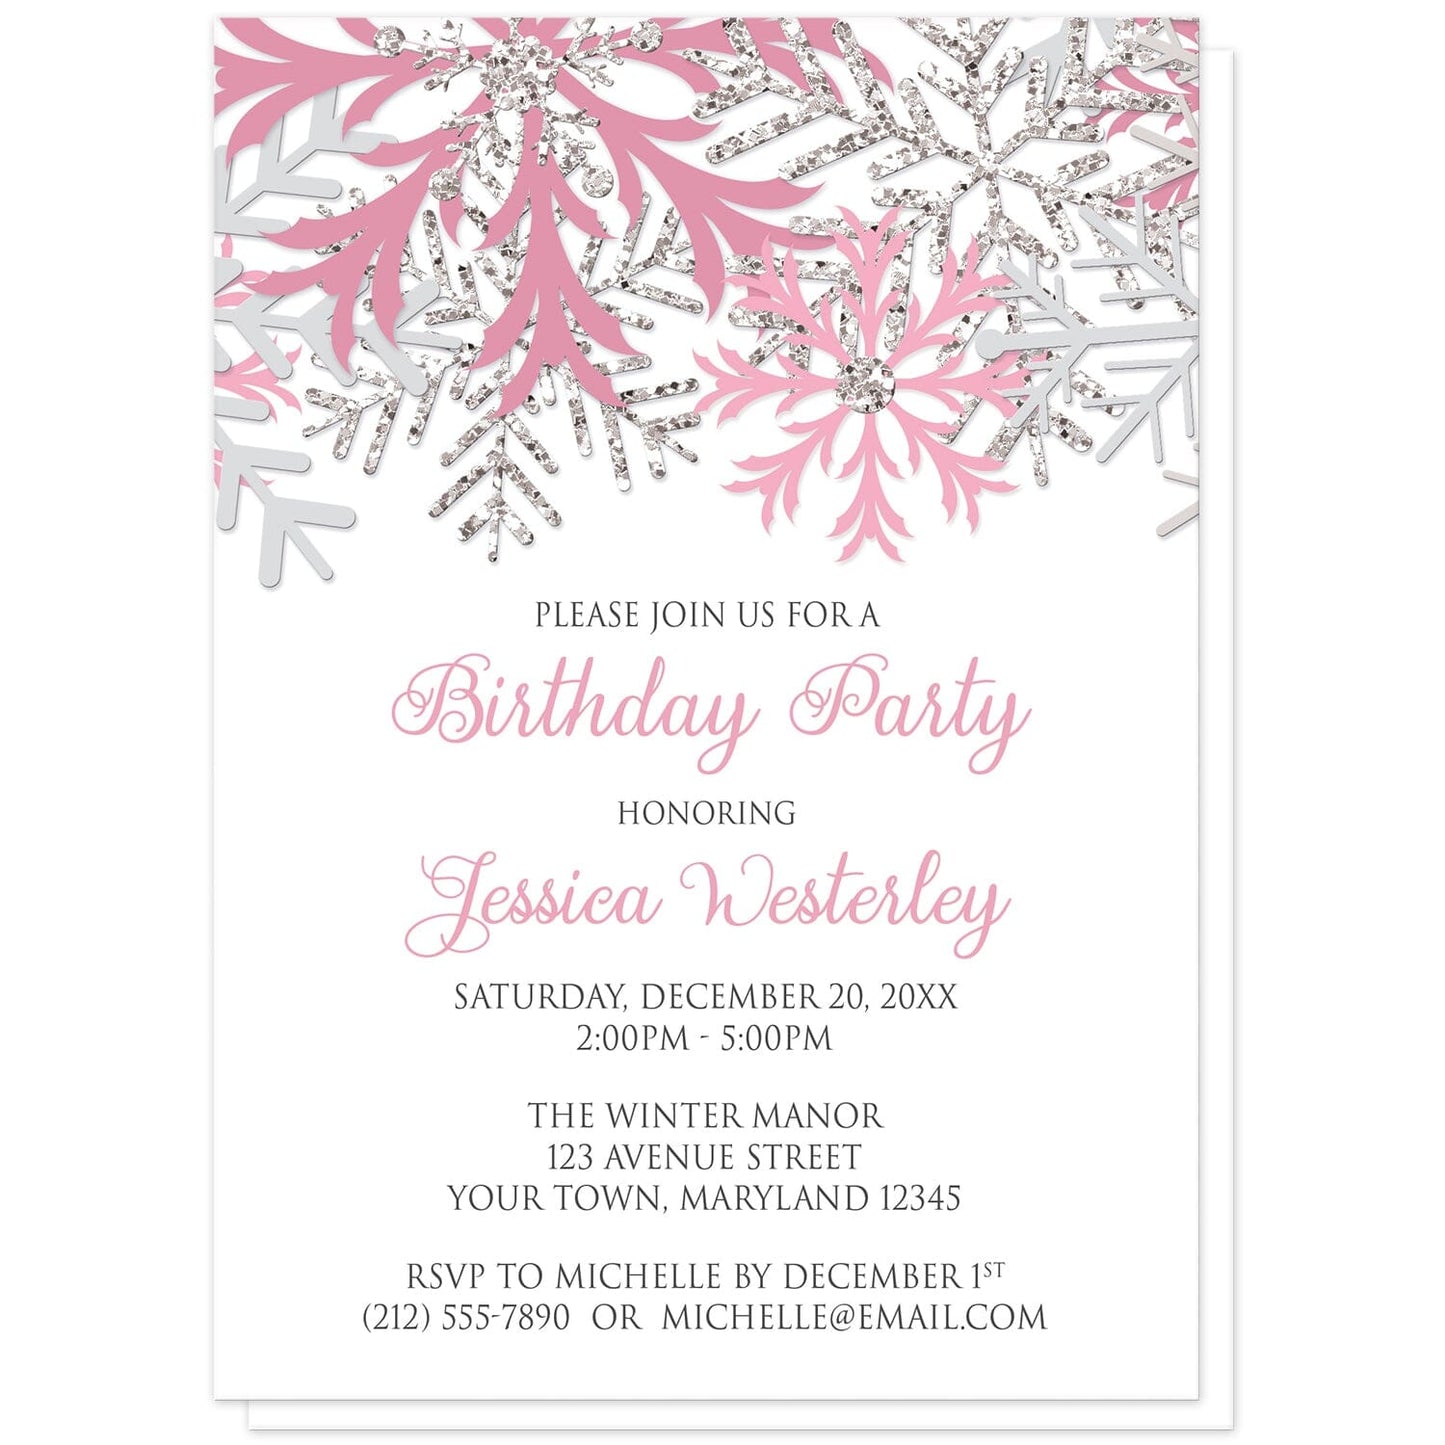 Winter Pink Silver Snowflake Birthday Party Invitations at Artistically Invited. Beautiful winter pink silver snowflake birthday party invitations designed with pink, light pink, silver-colored glitter-illustrated, and light gray snowflakes along the top over a white background. Your personalized birthday celebration details are custom printed in pink and gray below the pretty snowflakes.